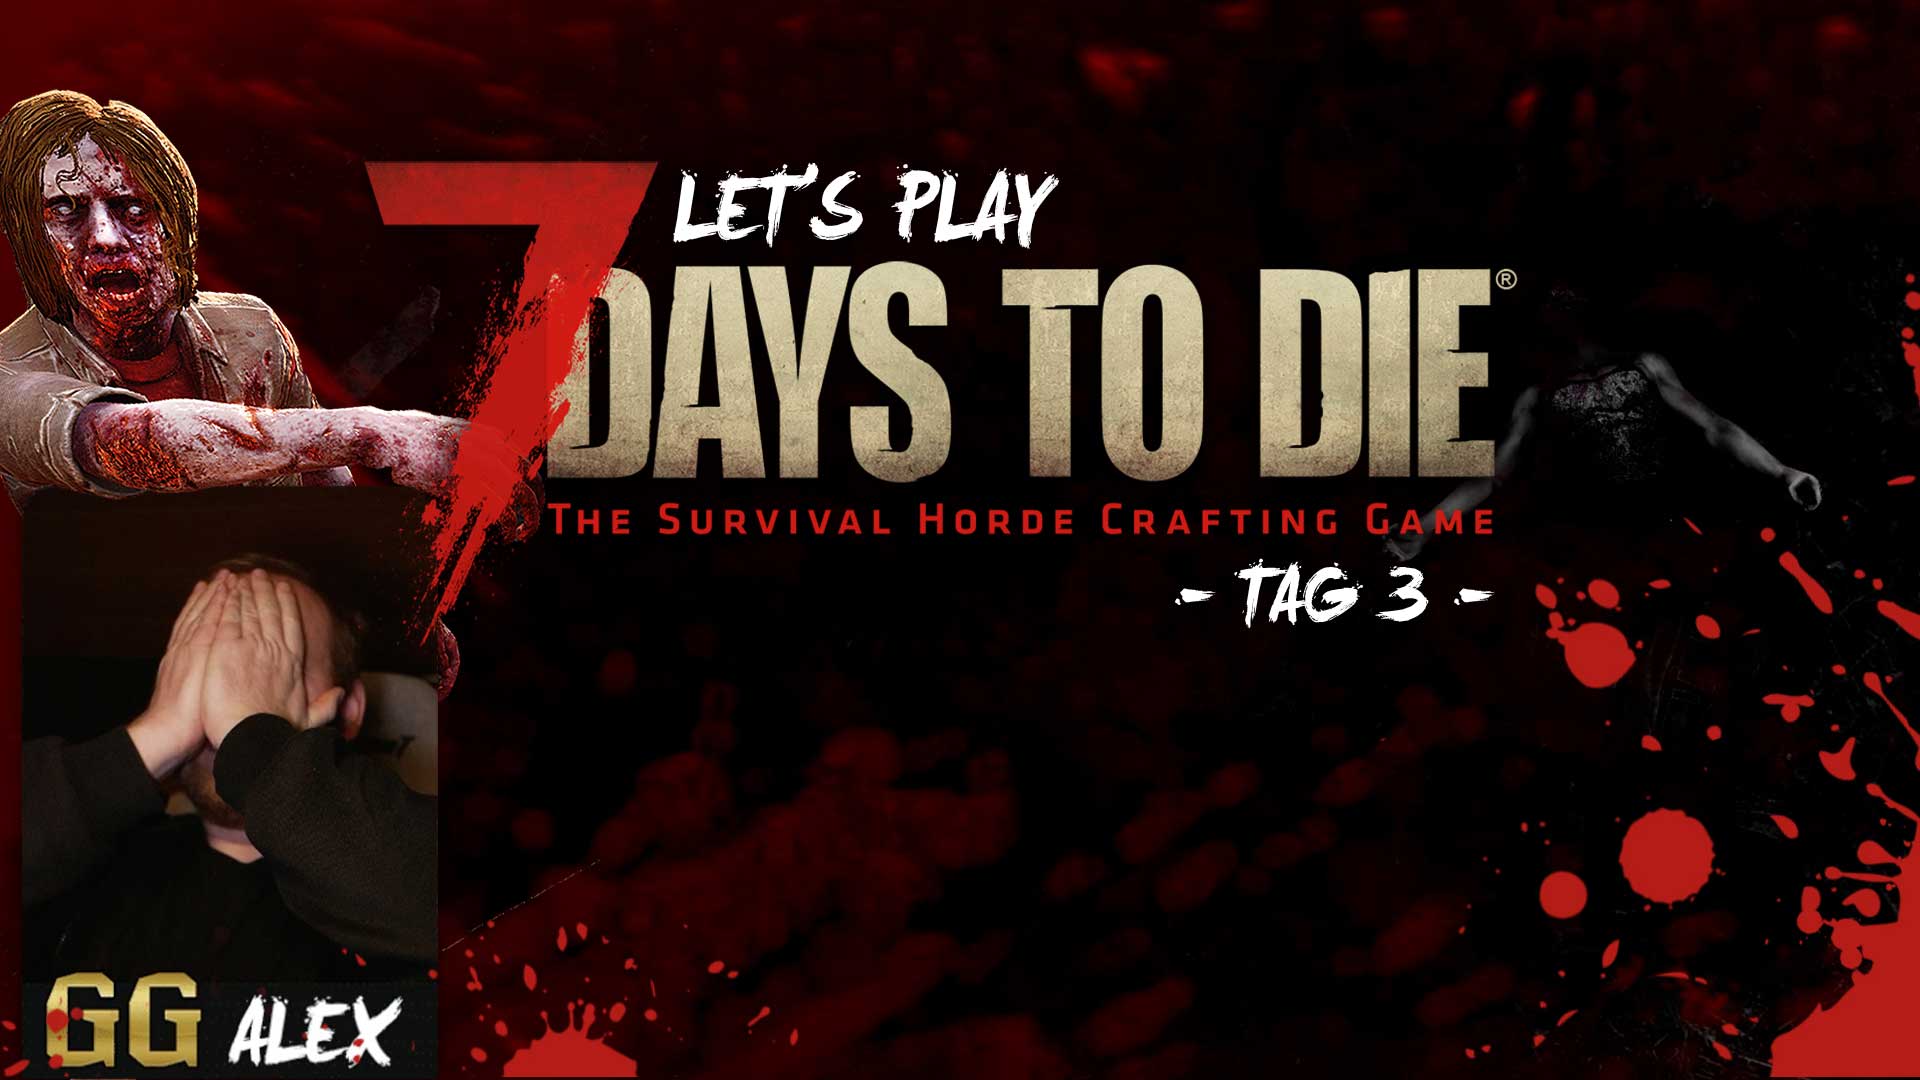 lets play 7 days to die tag 3 GG v2